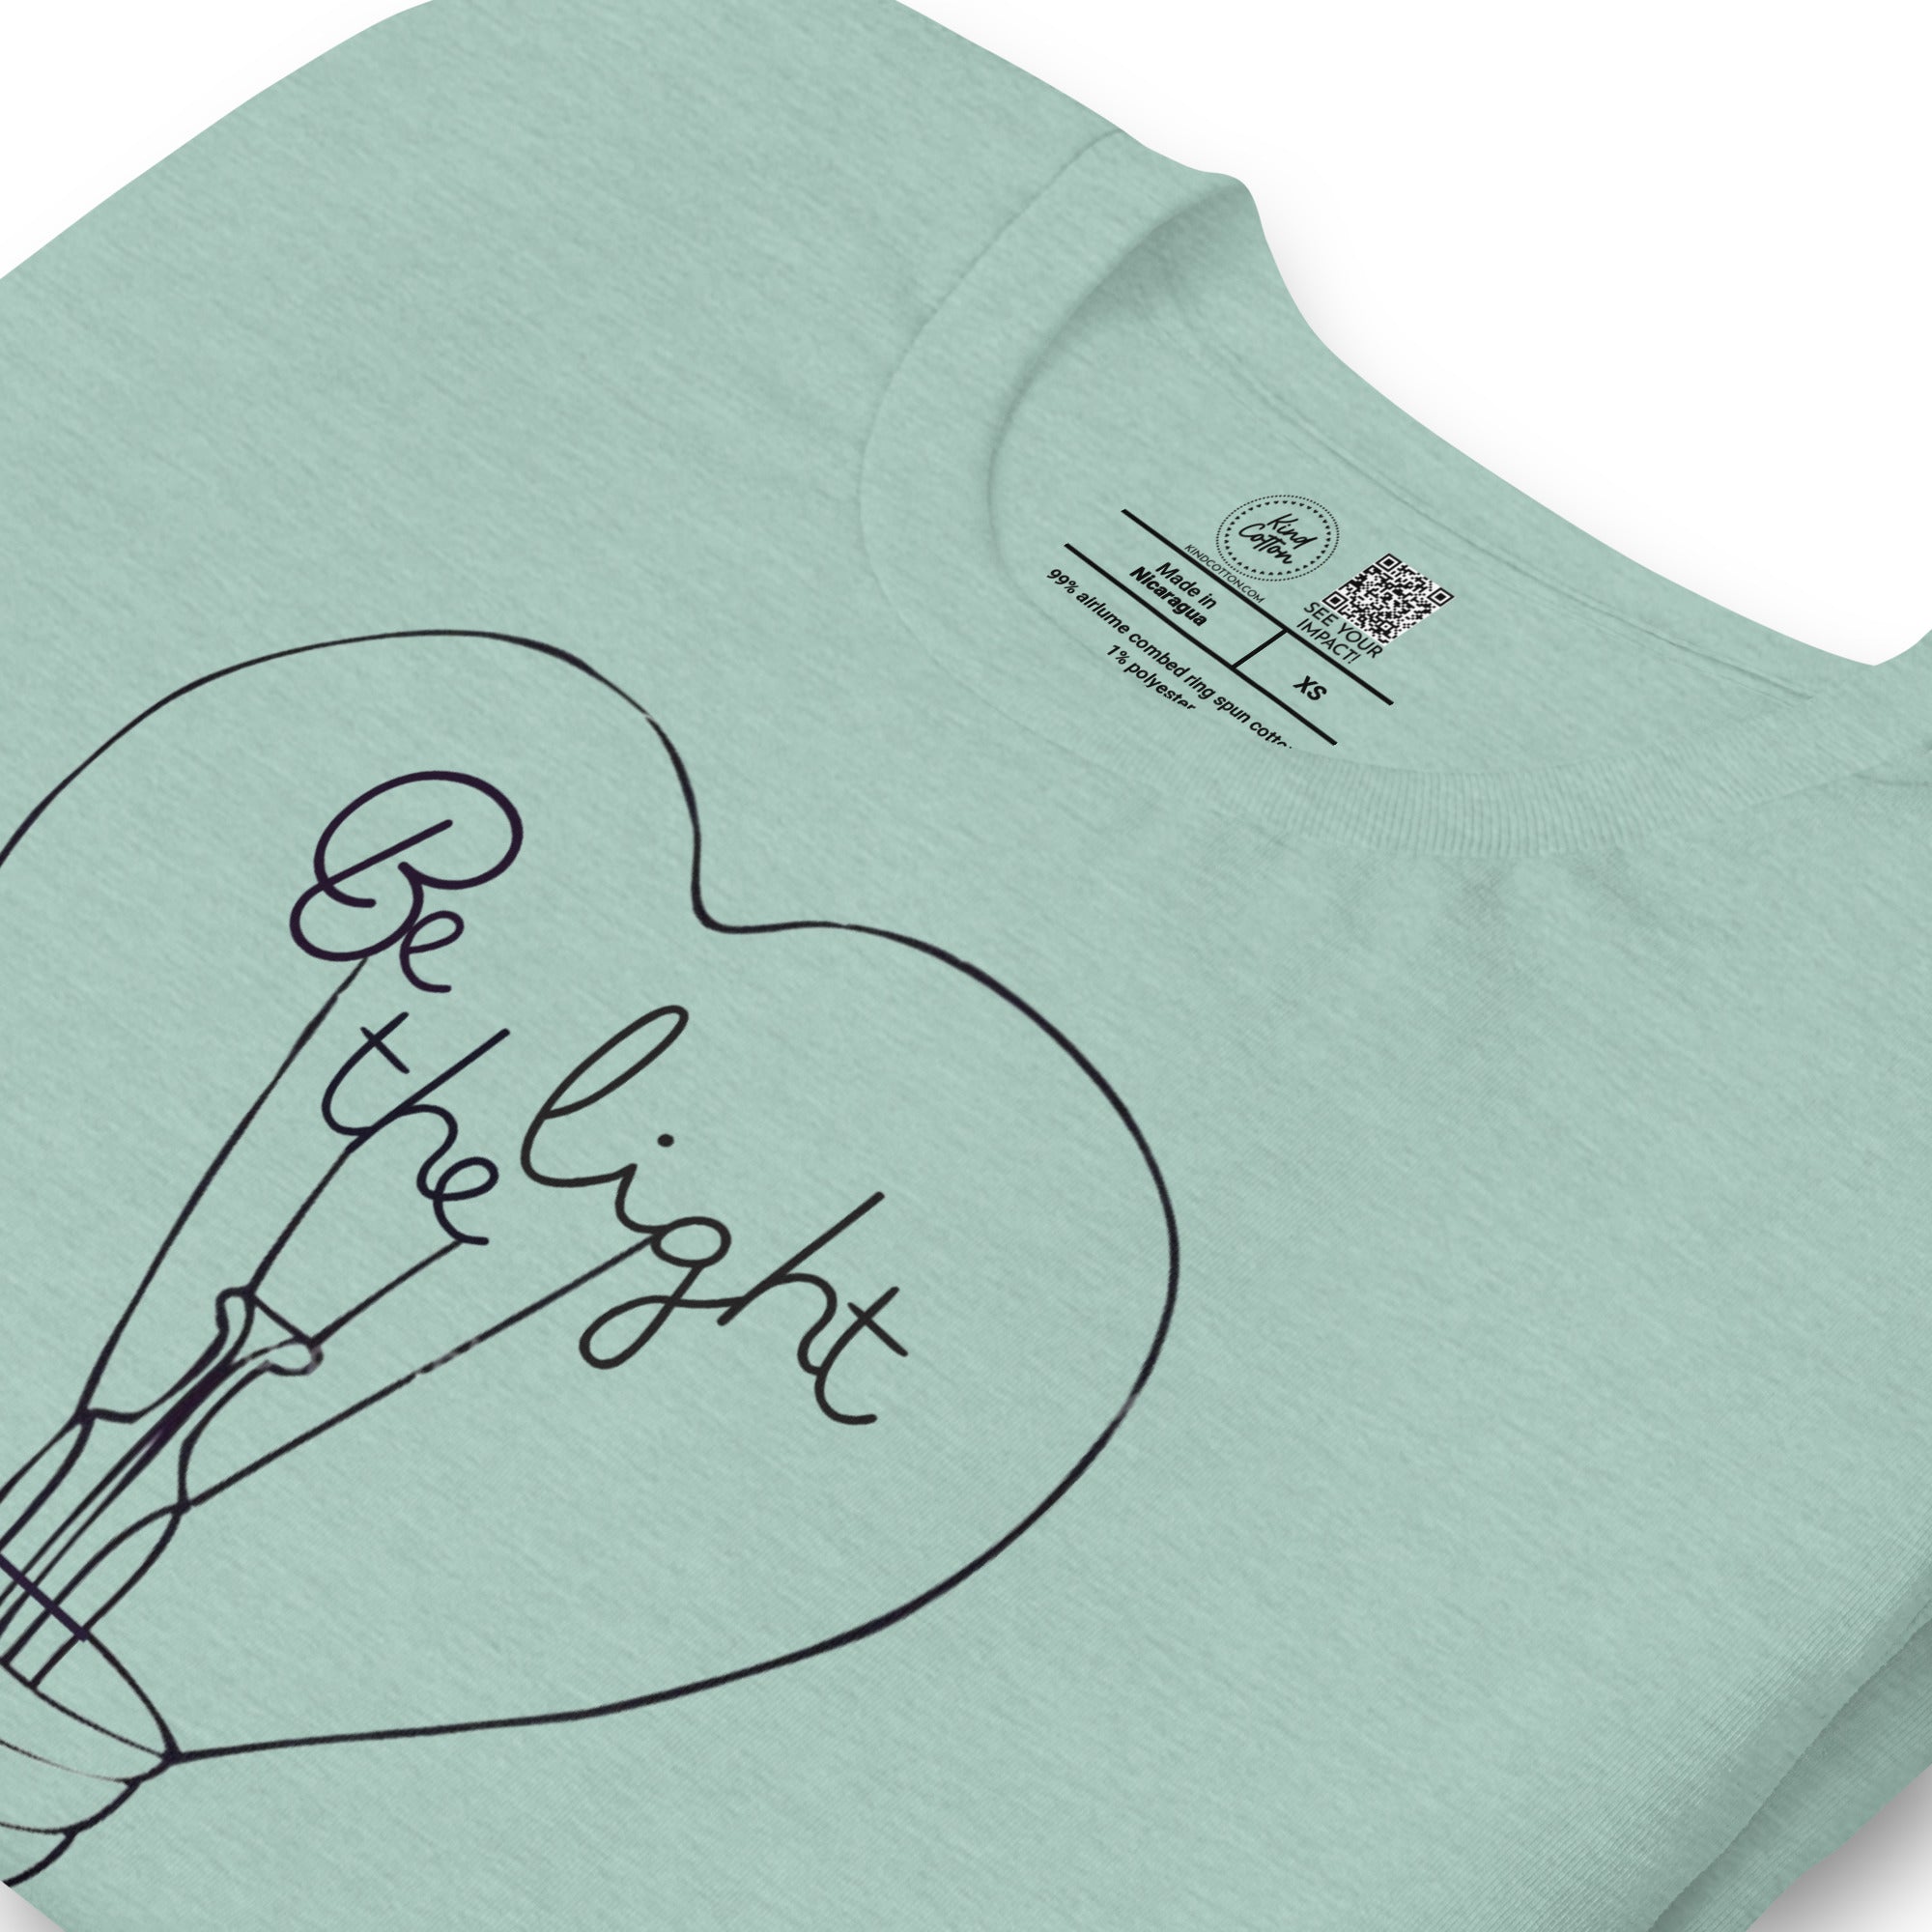 Be The Light Classic Tee